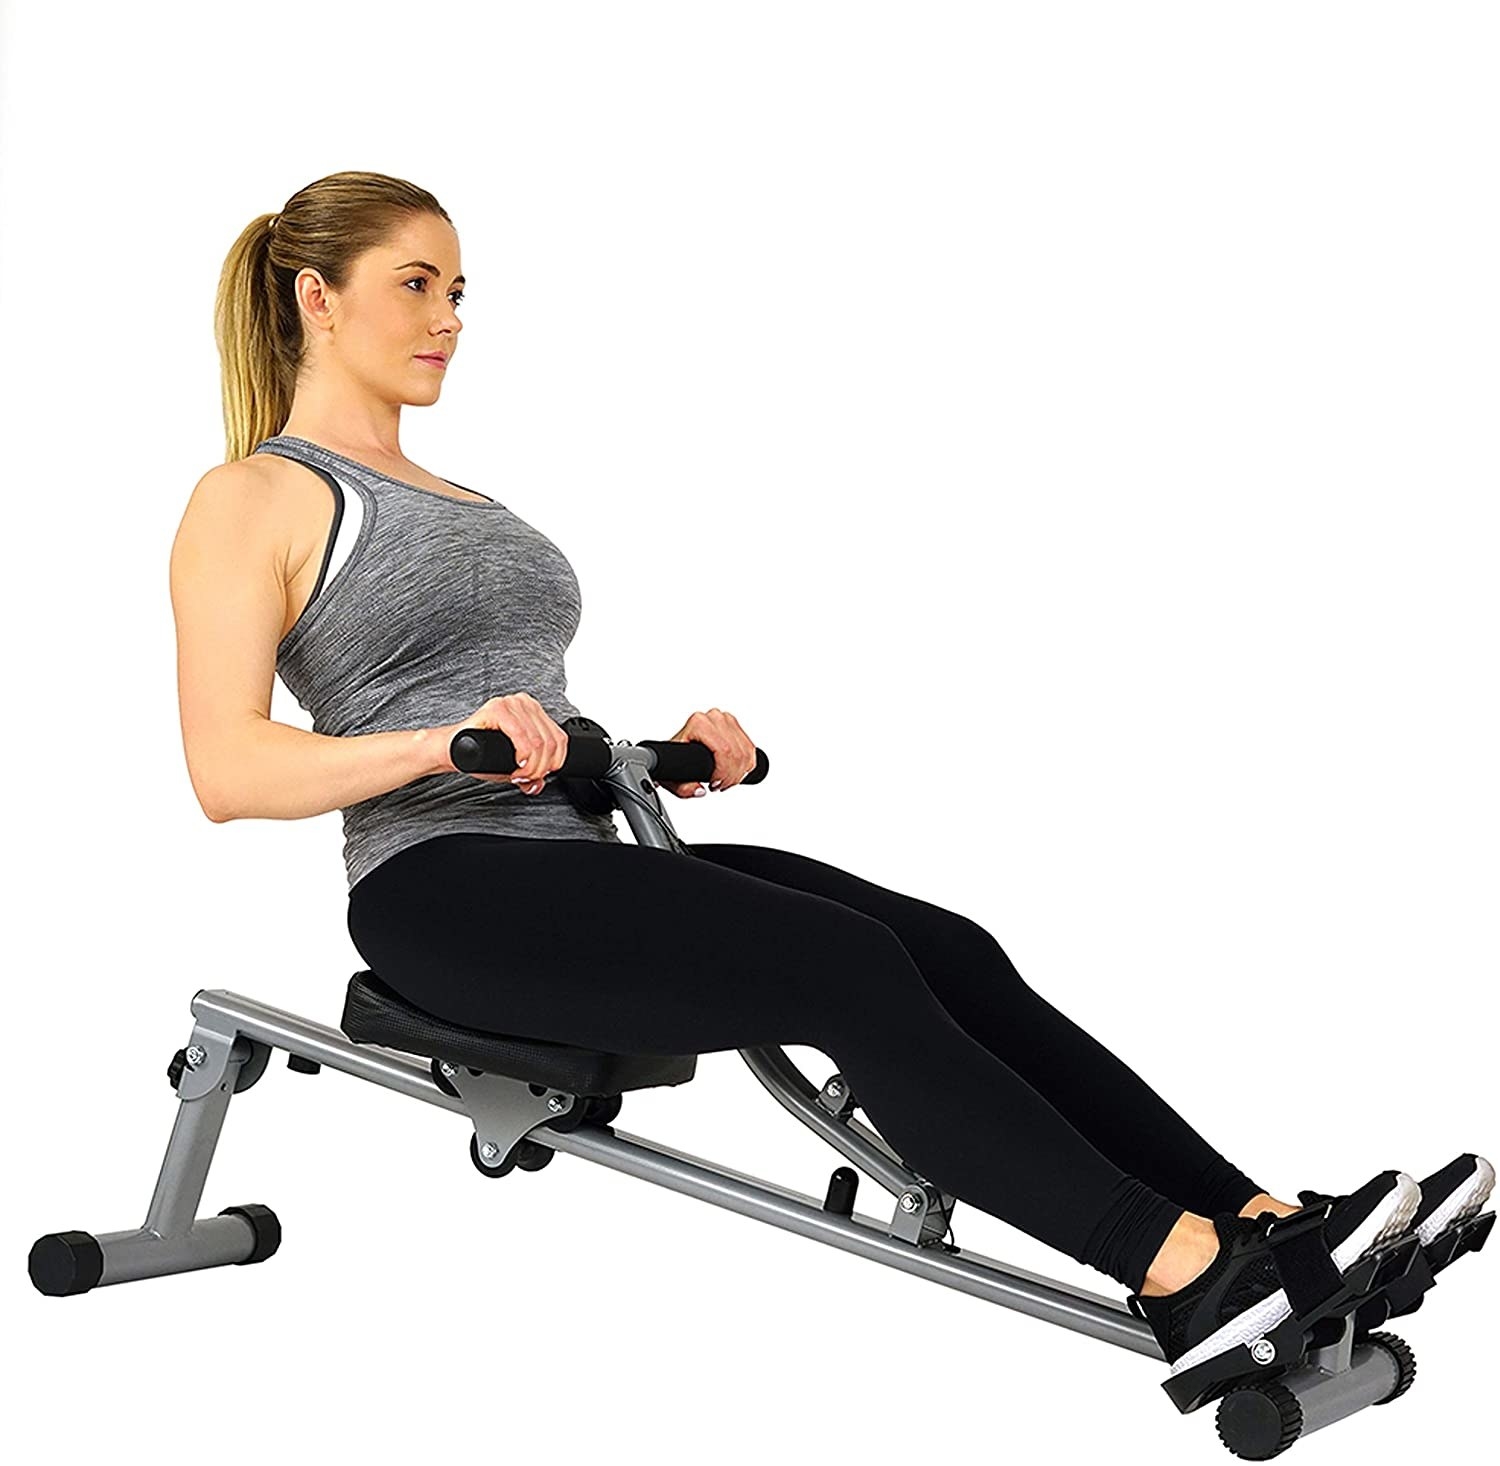 Woman on compact black and silver rowing machine